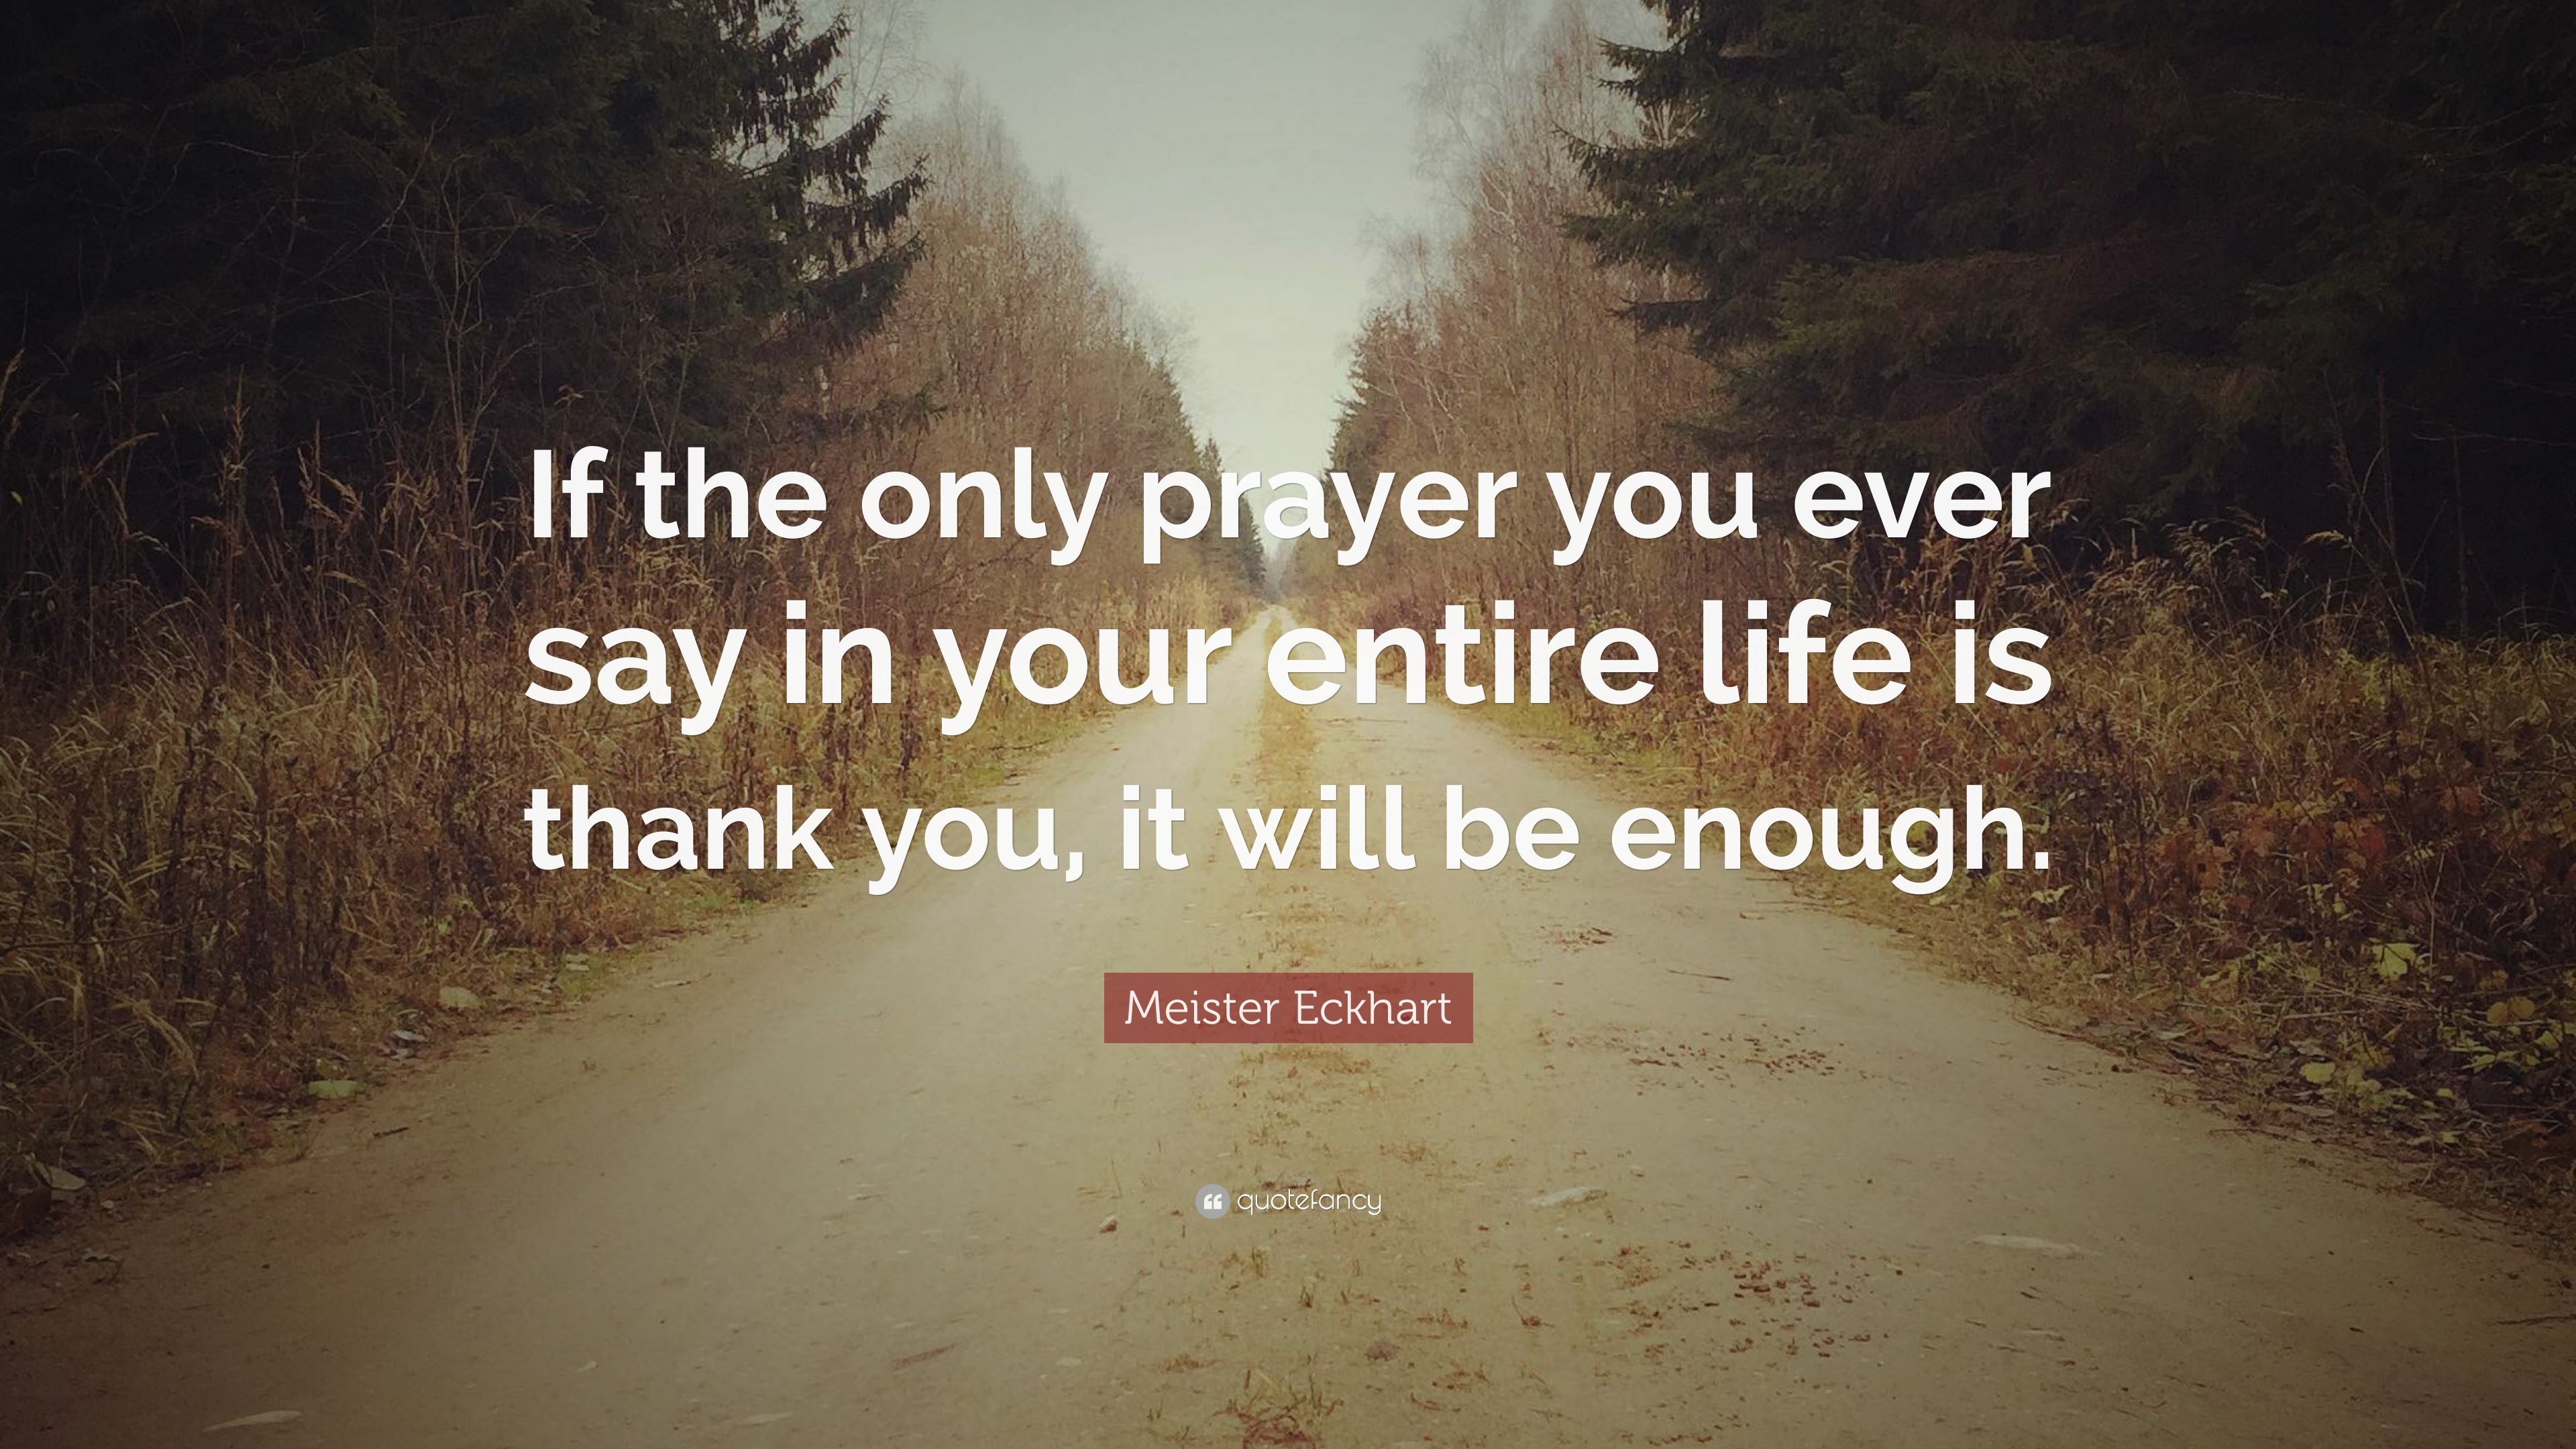 Meister Eckhart Quote: “If the only prayer you ever say in your entire ...